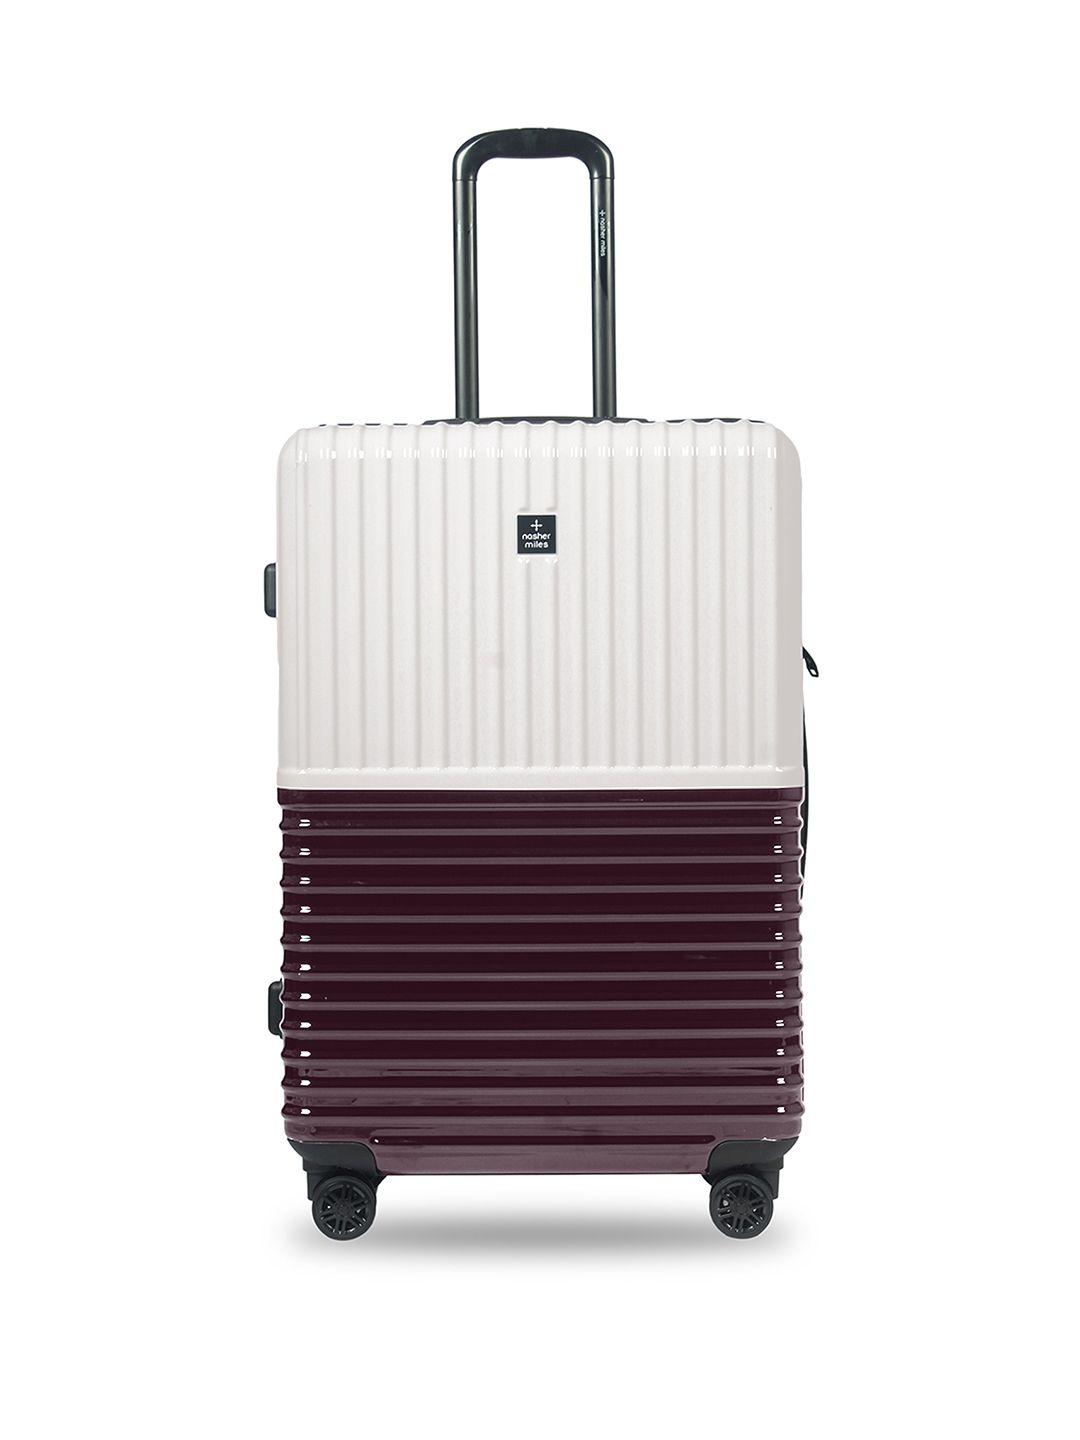 nasher miles istanbul colourblocked hard-sided large trolley suitcase 105 l